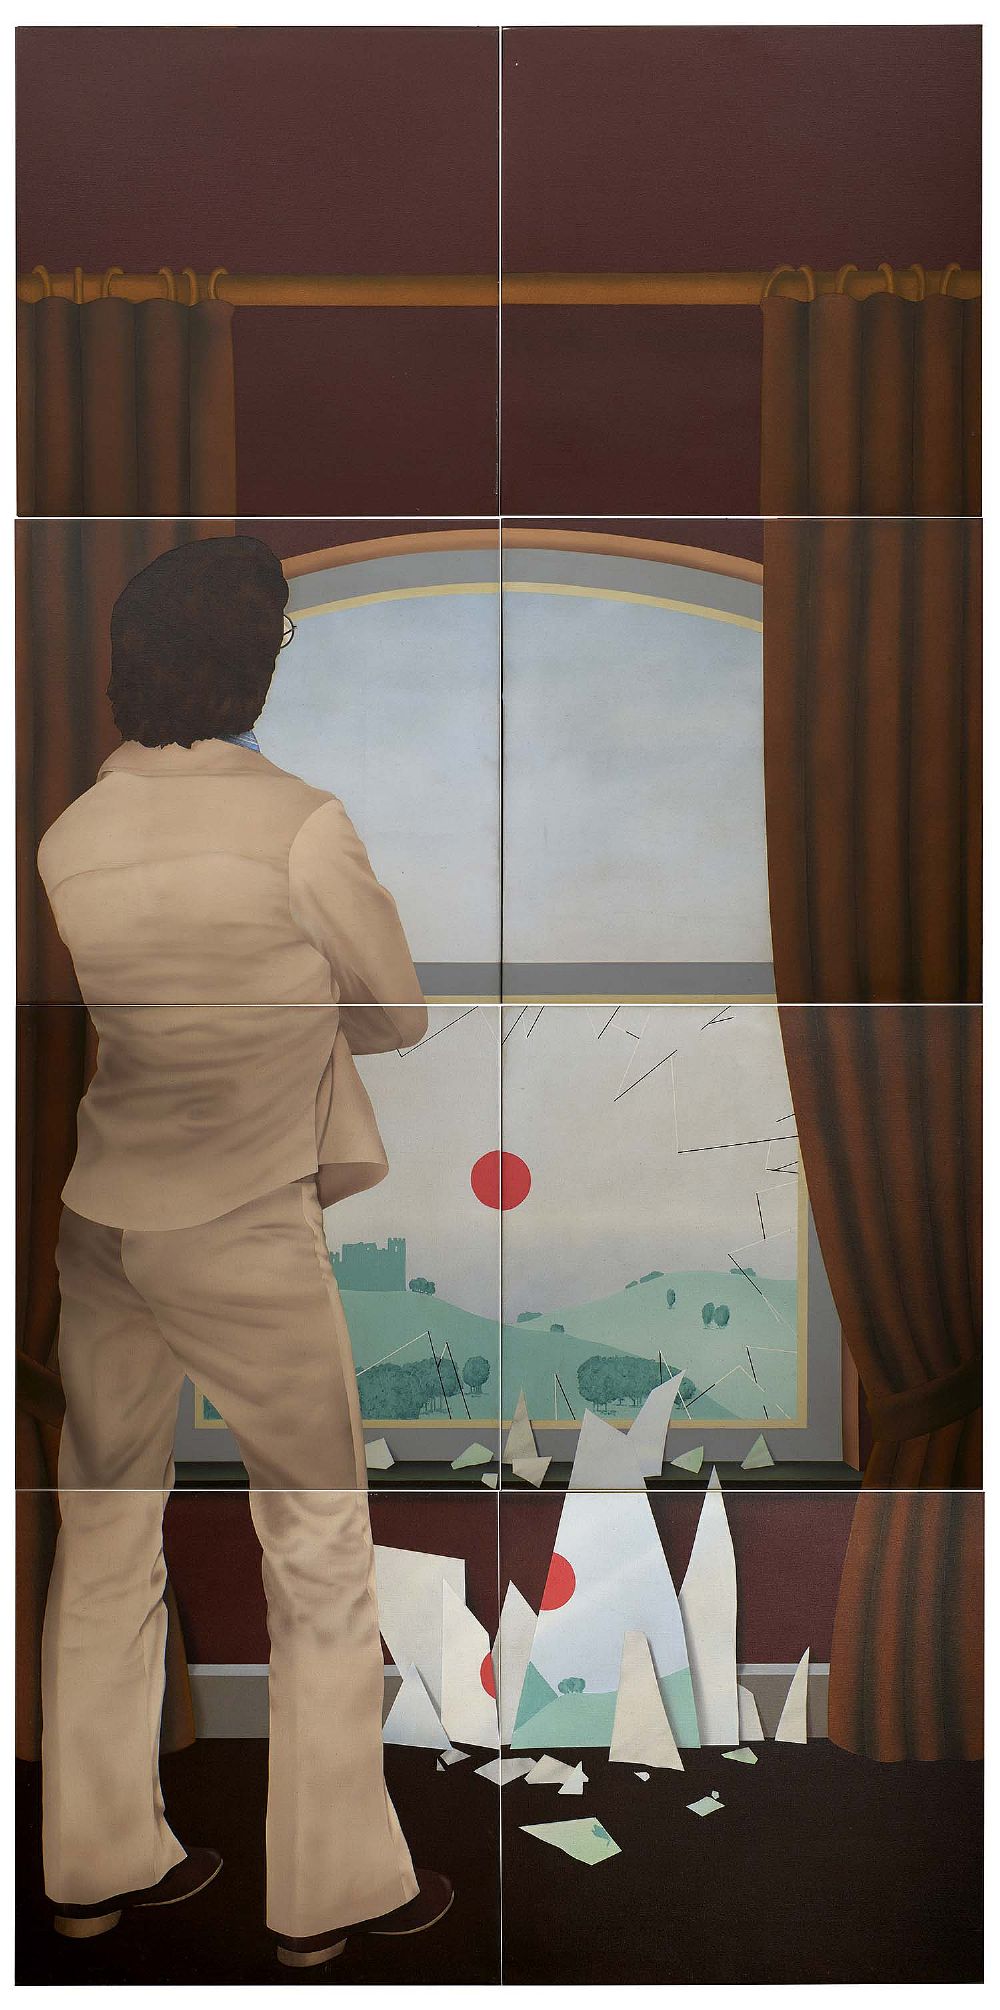 Lot 30 - HOMAGE TO MAGRITTE by Robert Ballagh